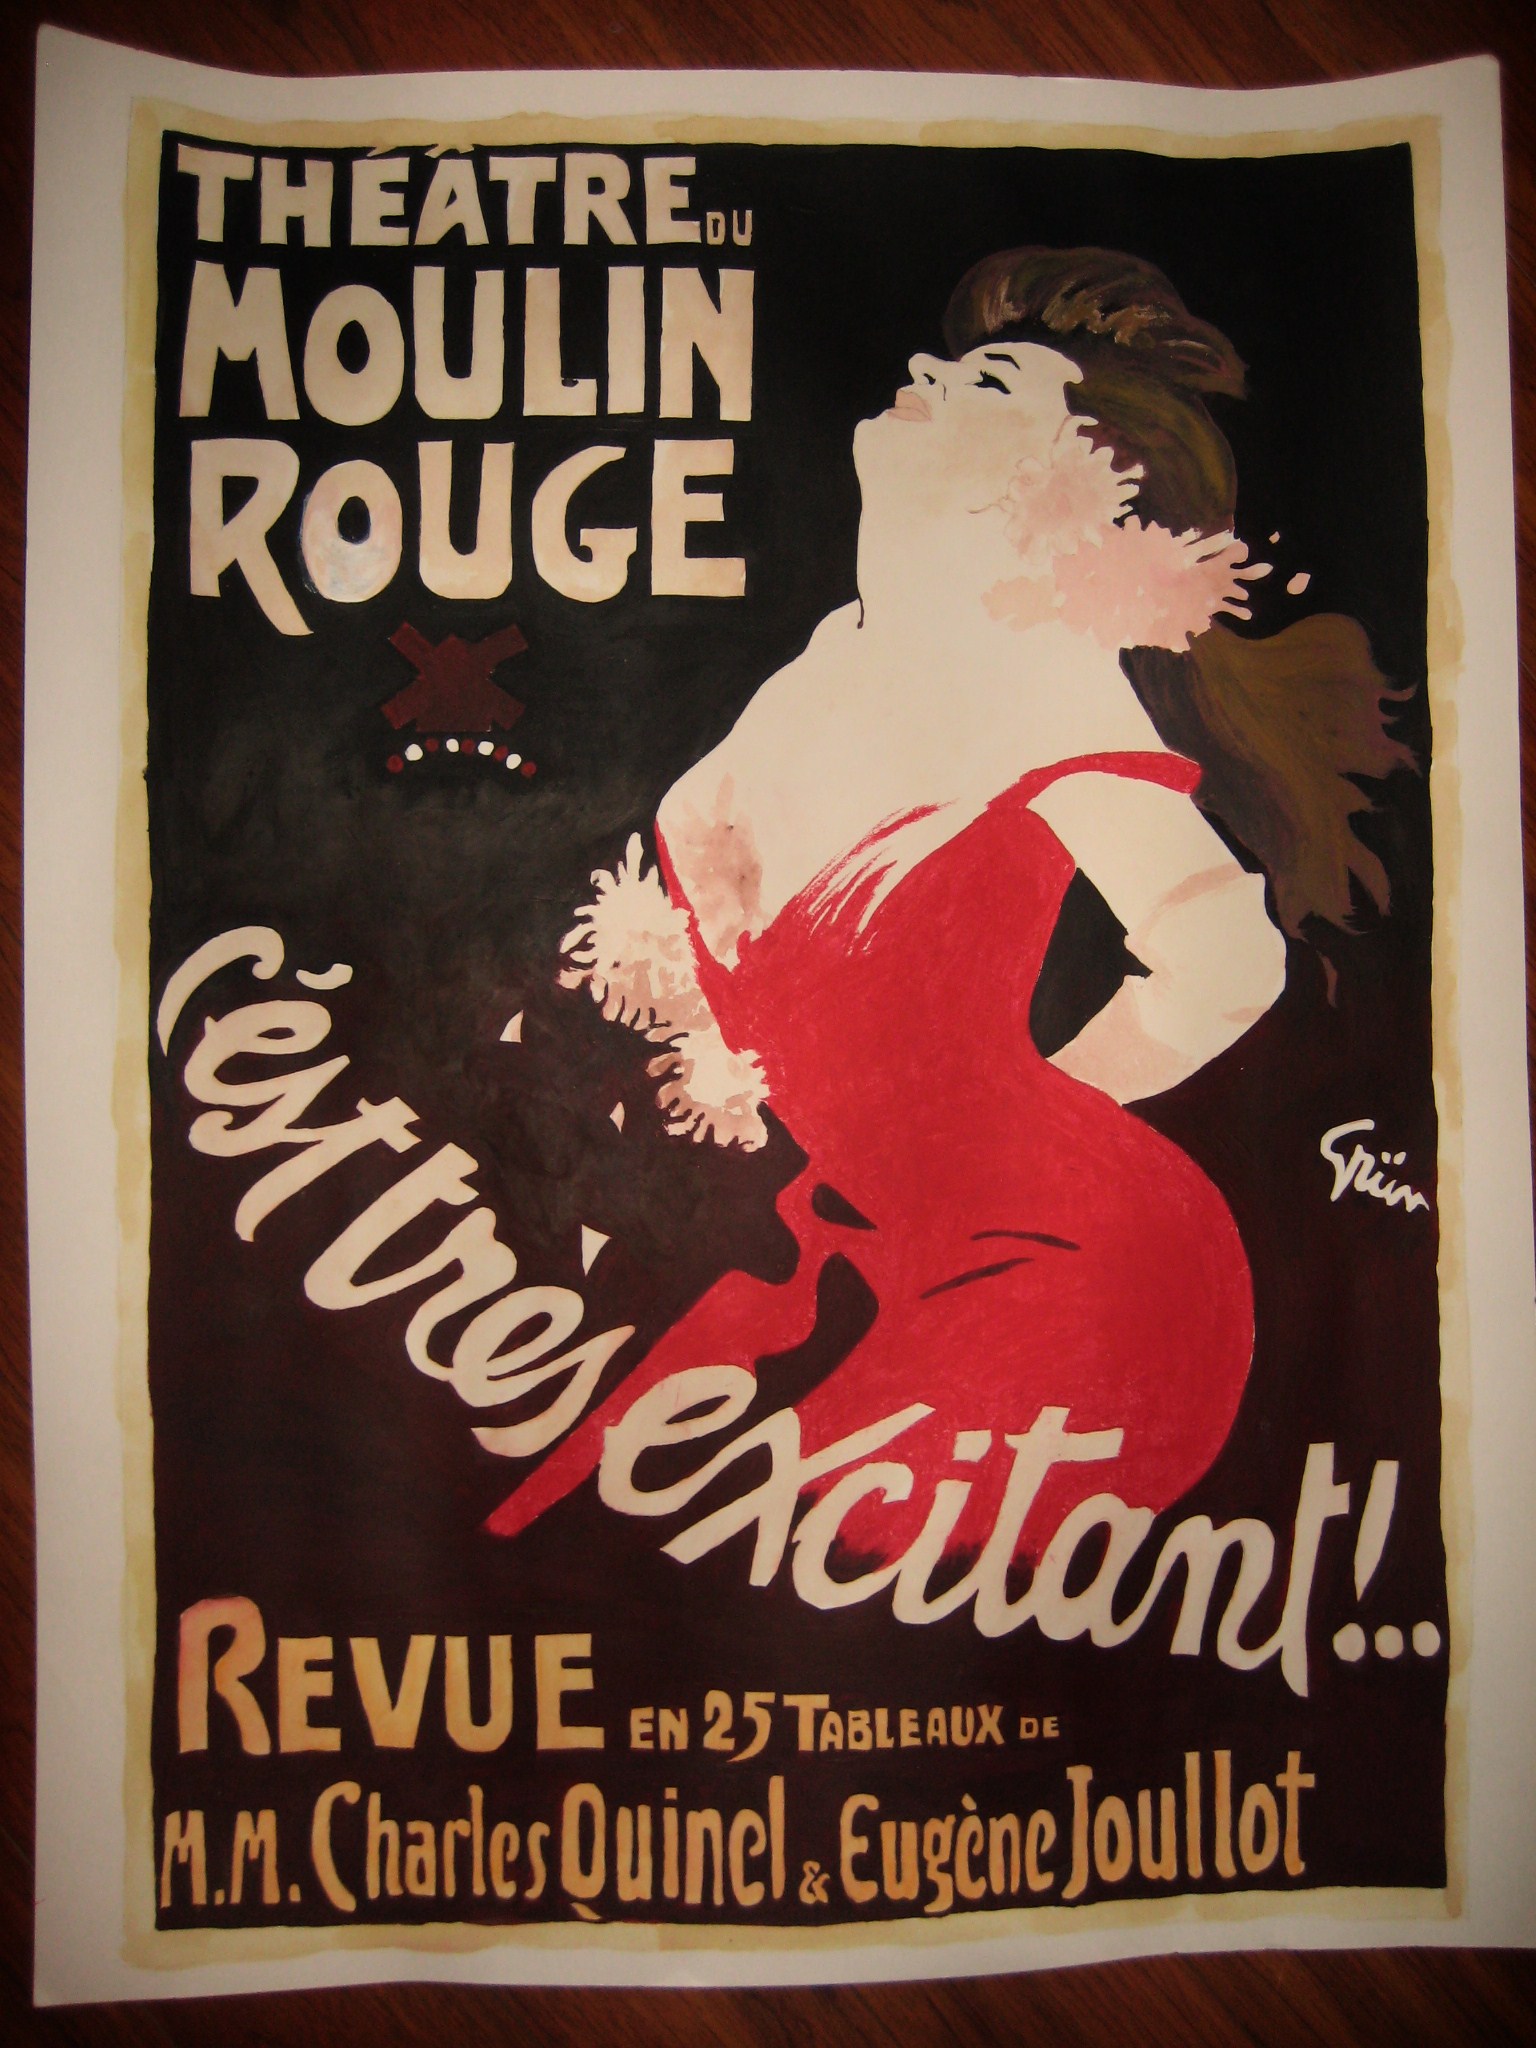 Moulin Rouge poster painting study